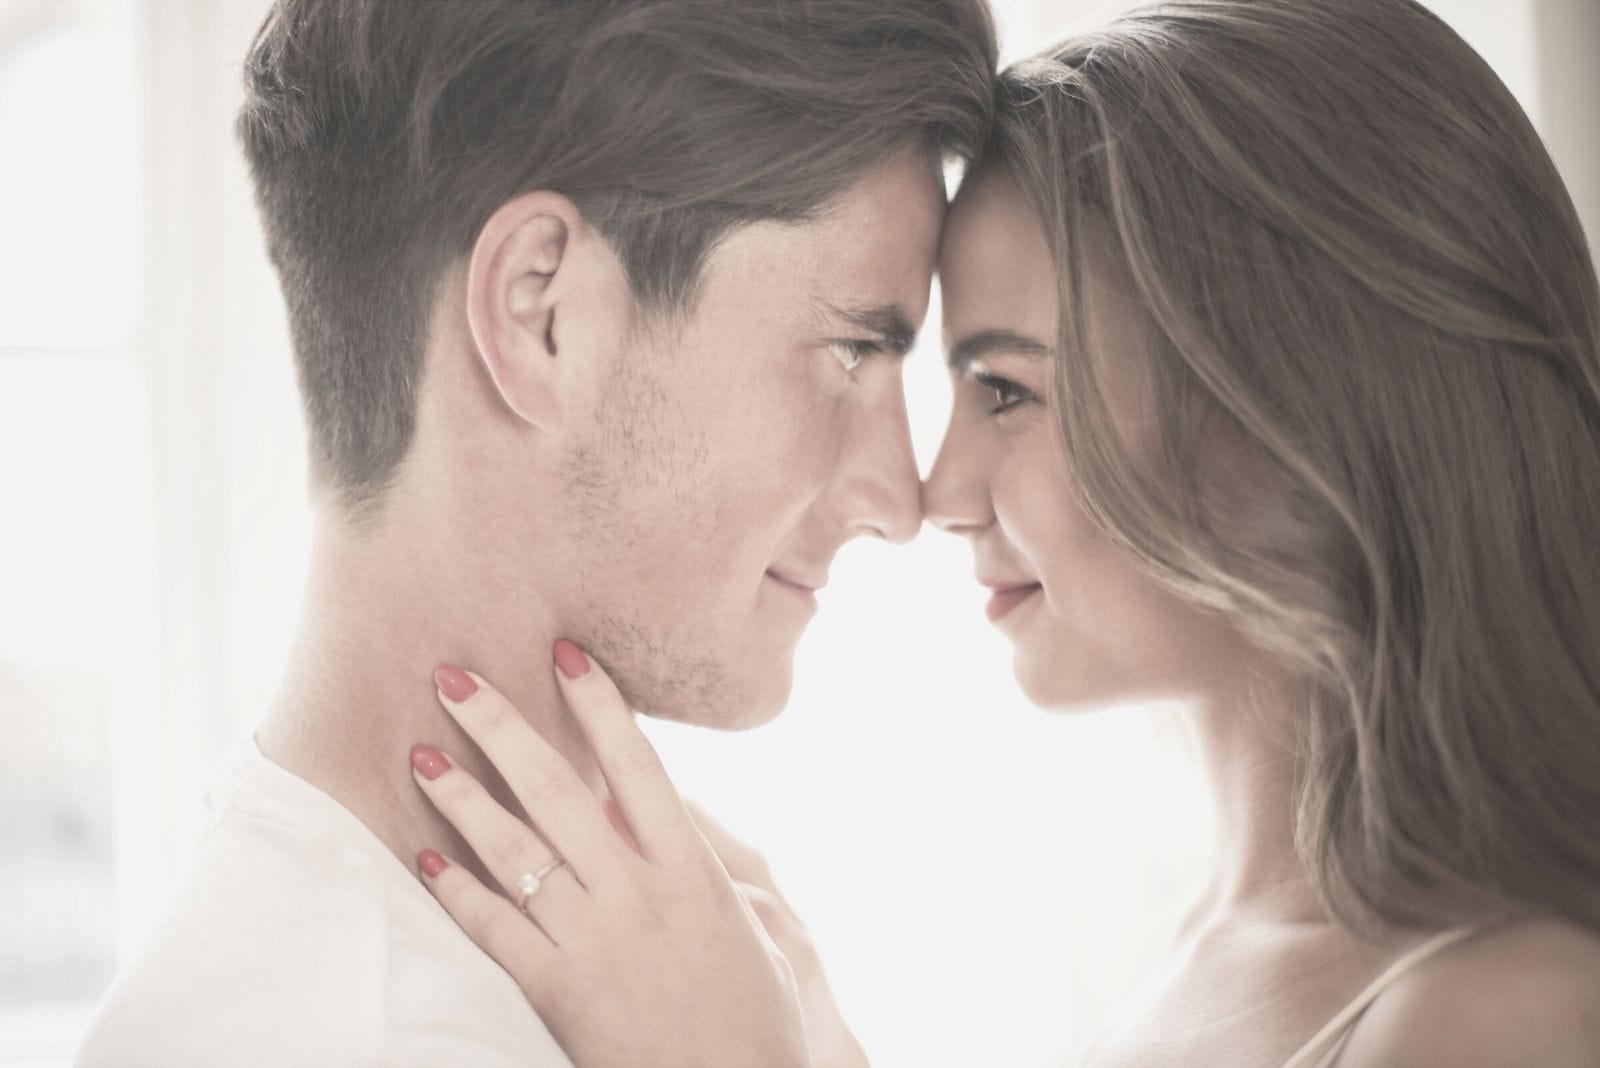 Every Healthy Relationship Is Based On These 4 Types Of Intimacy